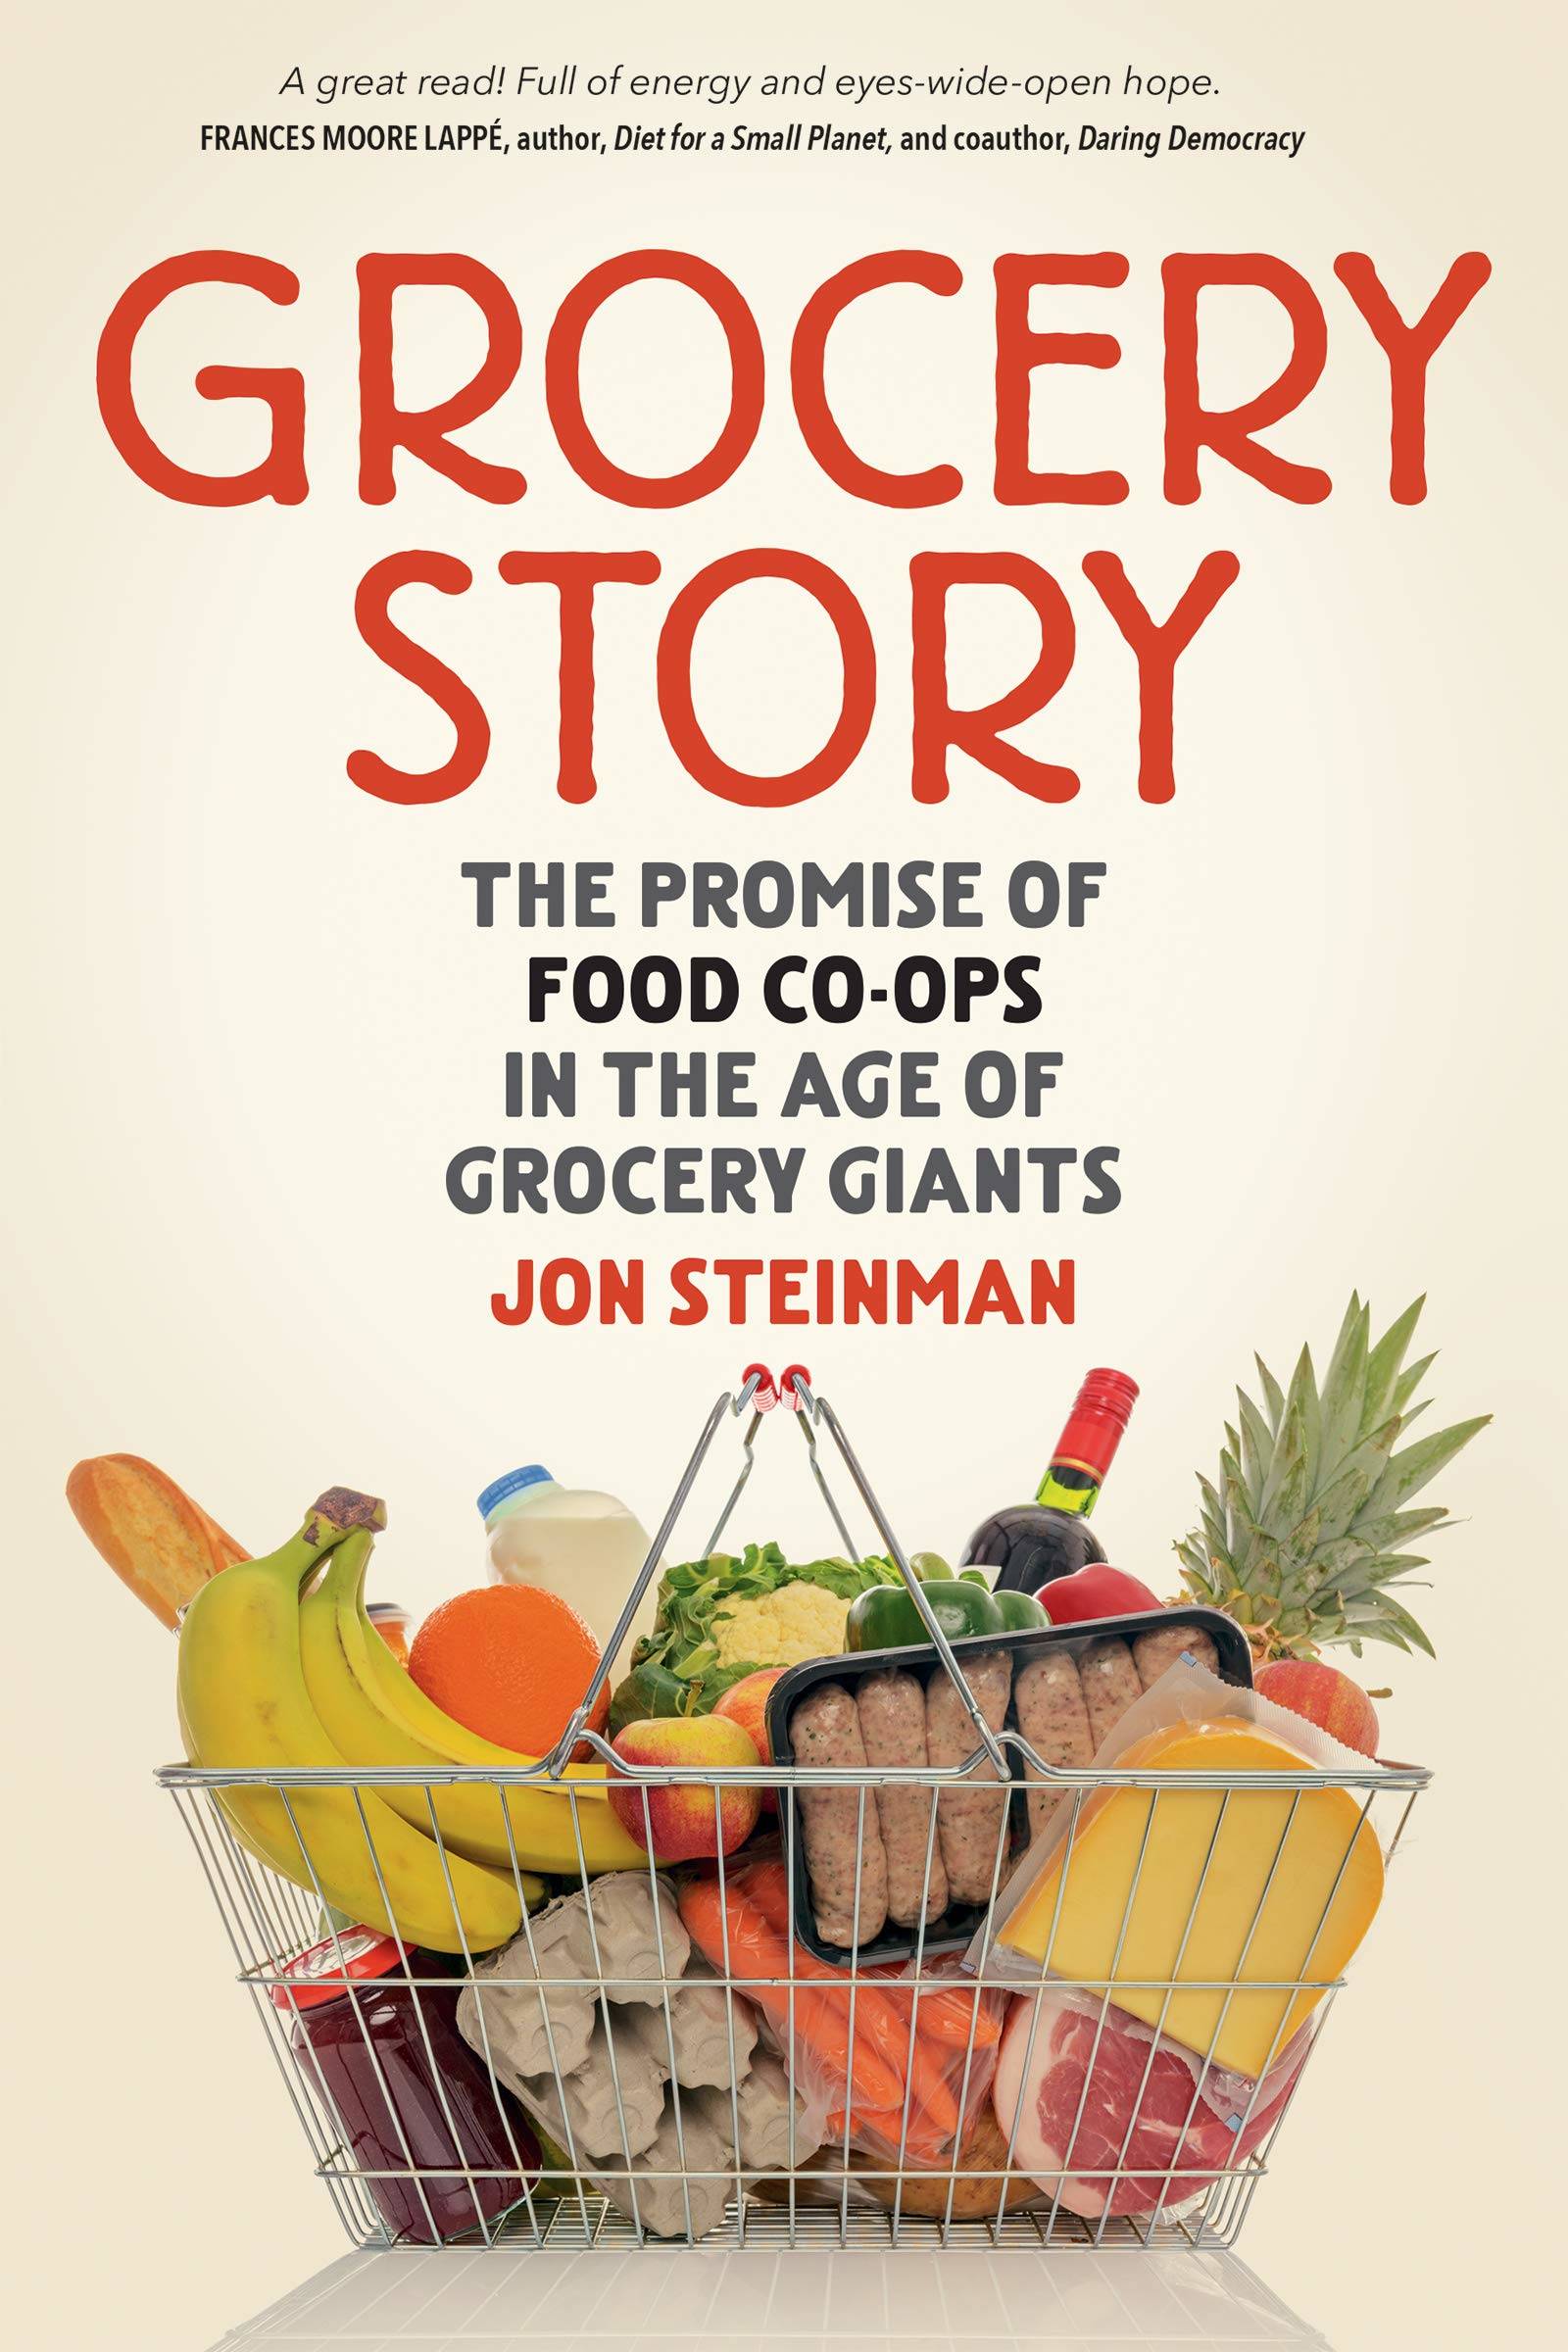 Orcas Food Co-op to host session on new book about grocery stores